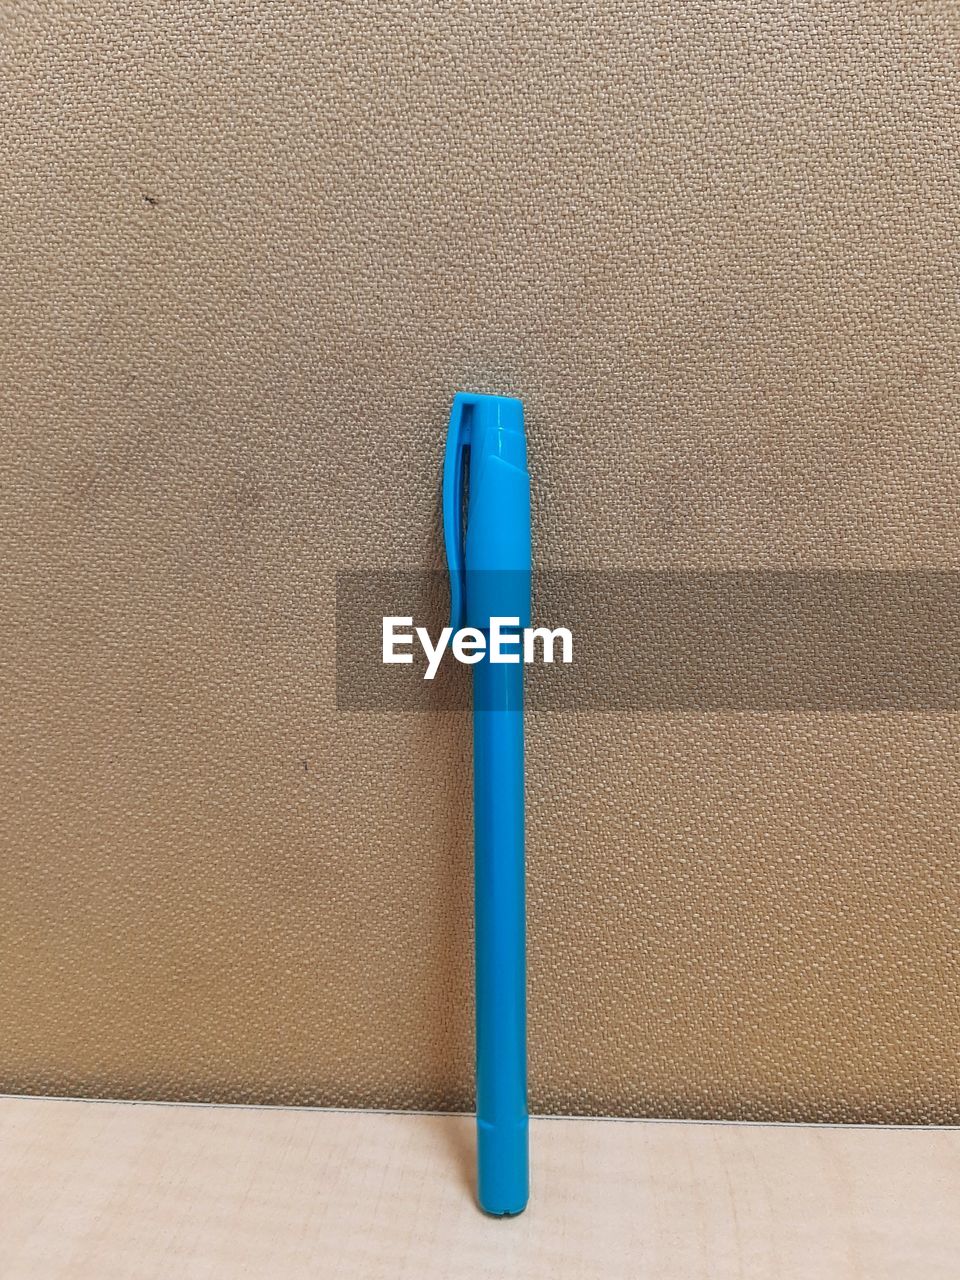 One pen that will help complete each task